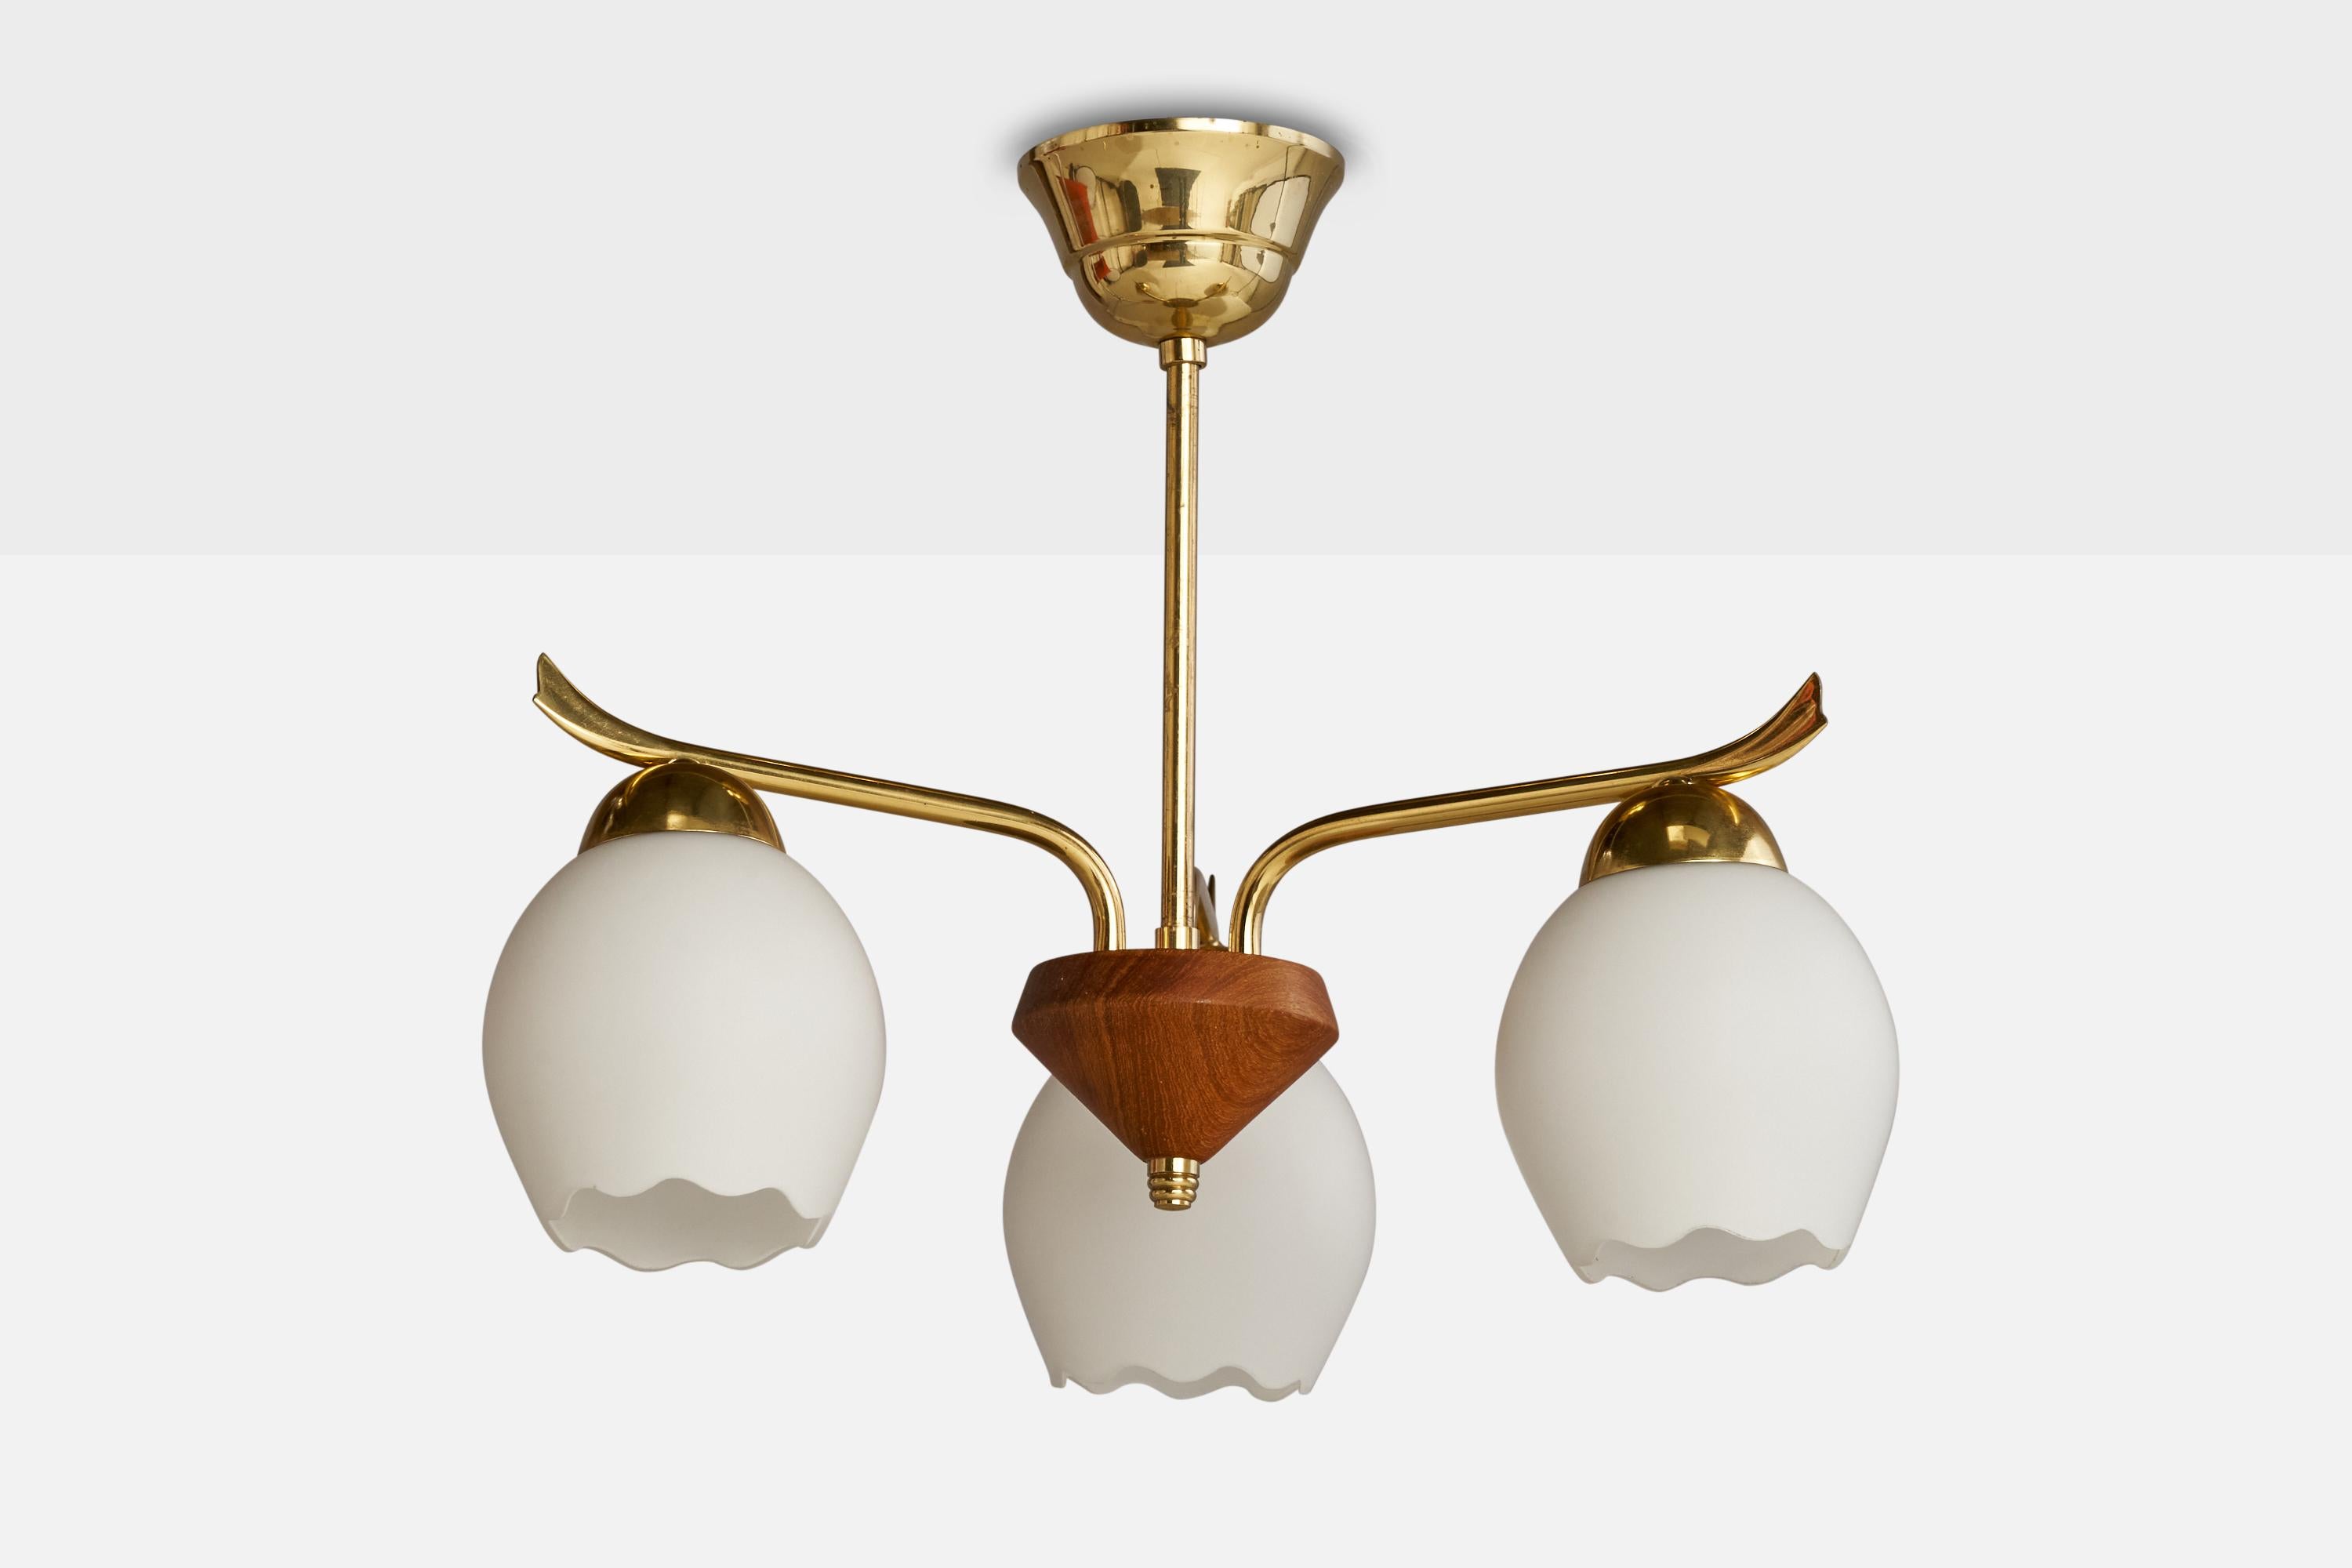 A brass teak and glass chandelier light designed and produced in Sweden, 1950s.

Dimensions of canopy (inches): 2.5” H x 3.75” Diameter
Socket takes standard E-26 bulbs. 3 sockets.There is no maximum wattage stated on the fixture. All lighting will